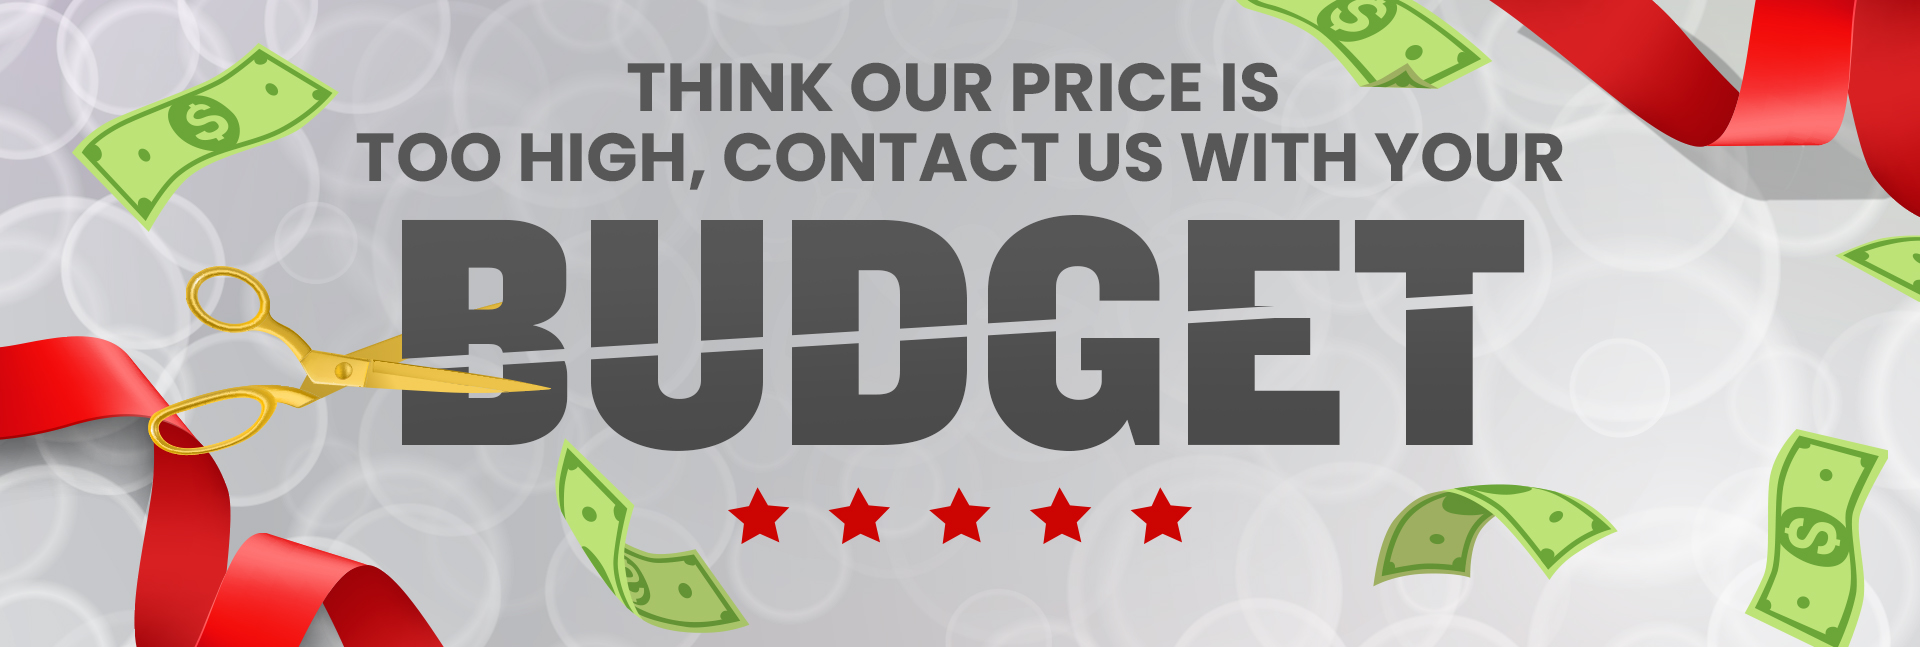 Think our budget is too high, contact us with your budget